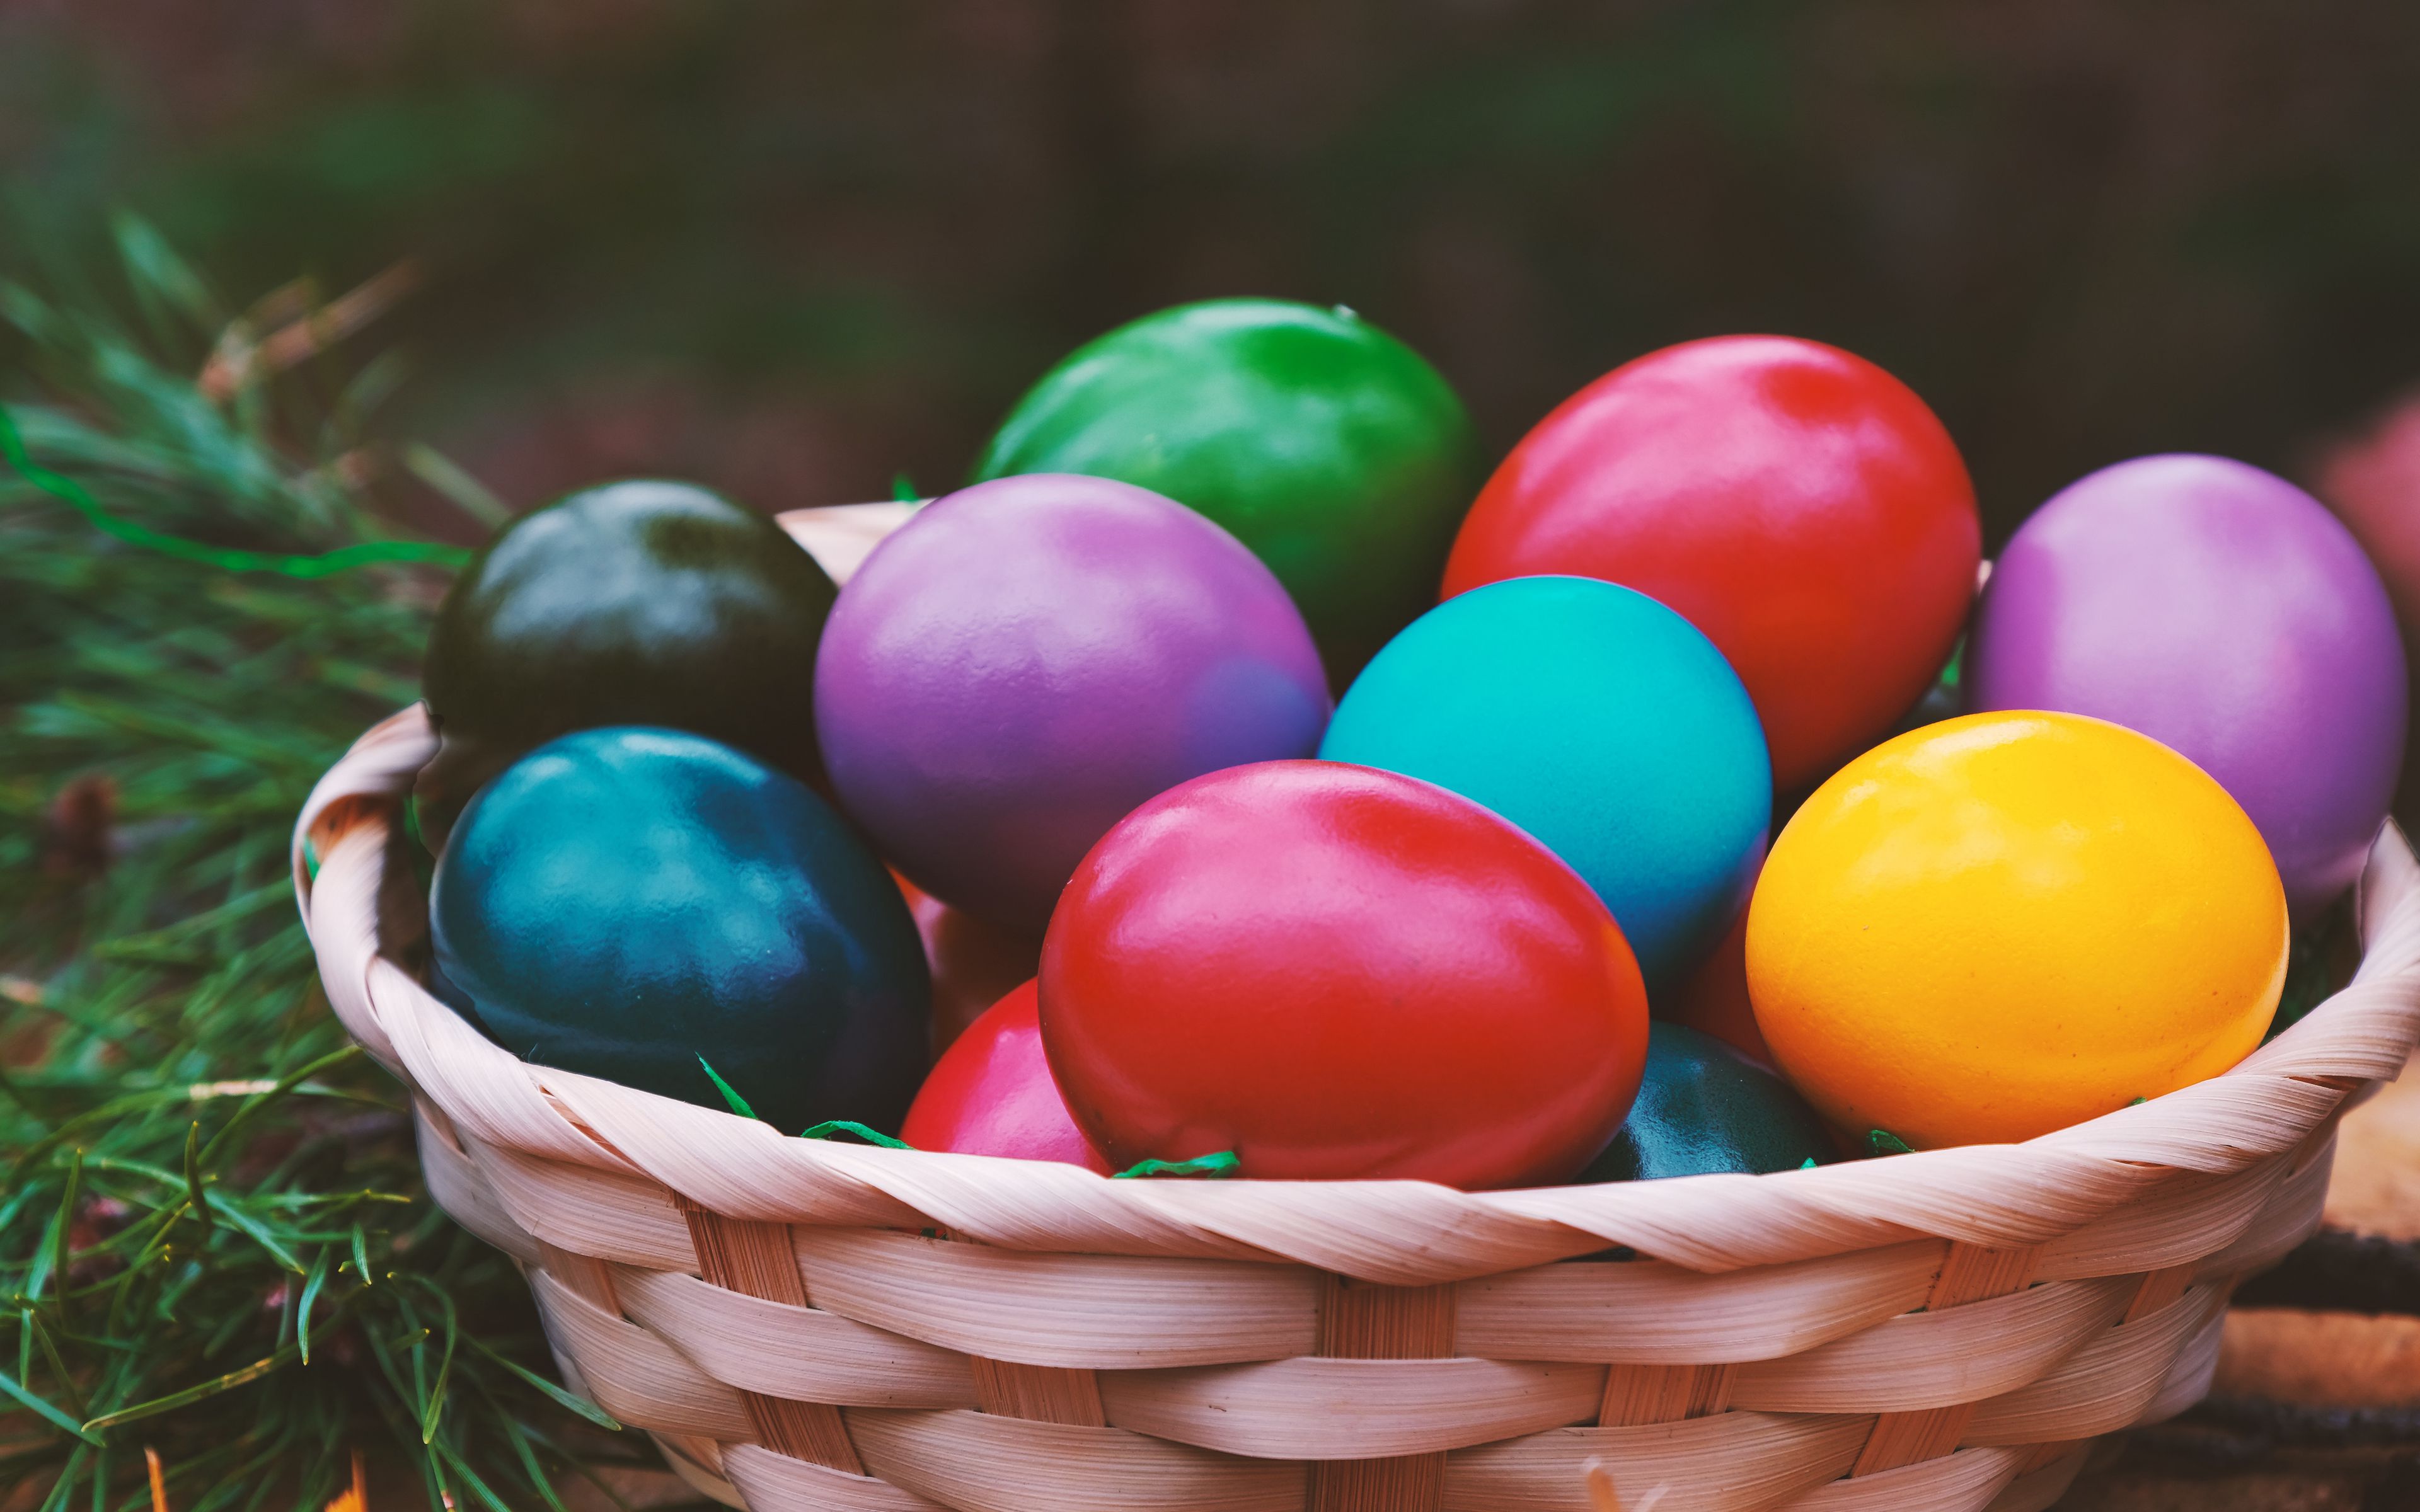 Download wallpaper 3840x2400 easter, eggs, colorful, basket 4k ultra HD 16:10 HD background